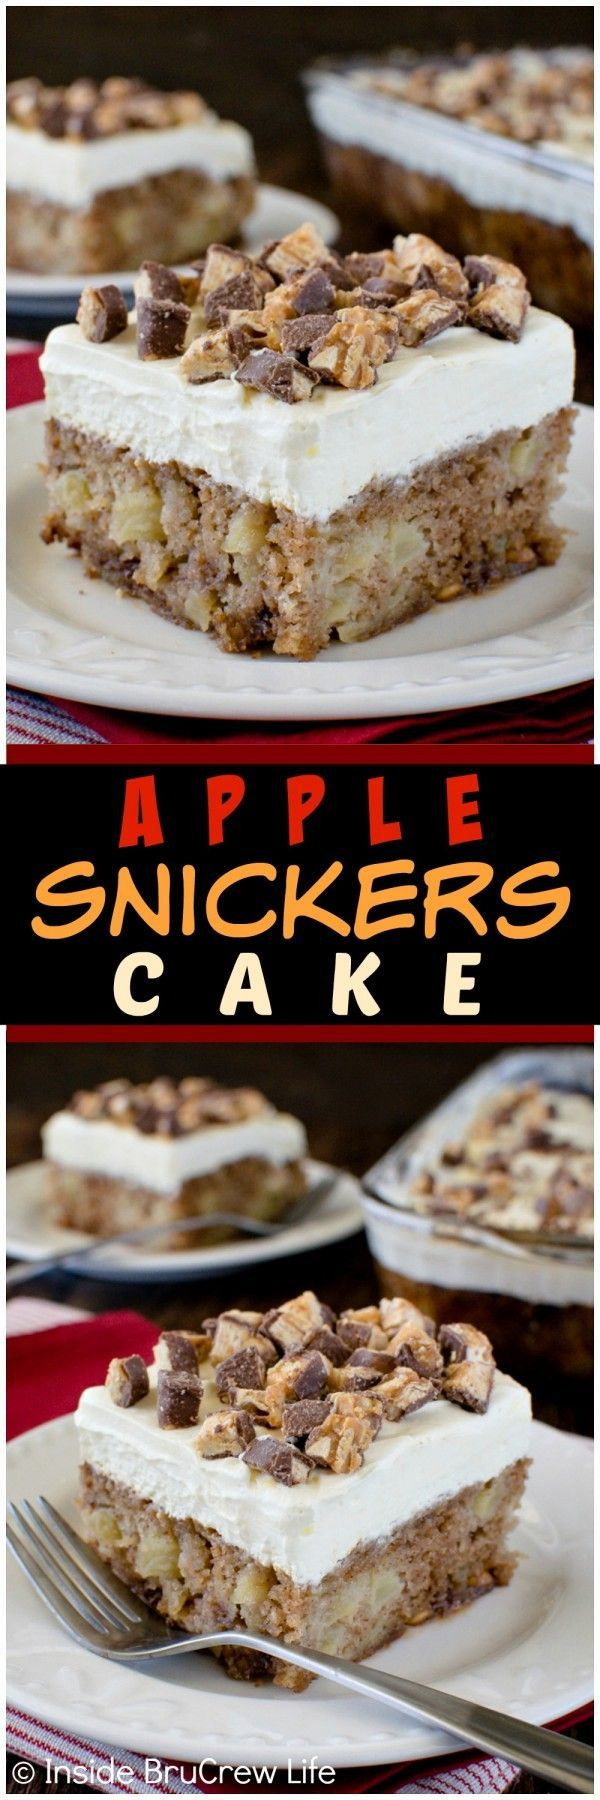 Good Fall Desserts
 Best 25 Snickers cake recipes ideas on Pinterest